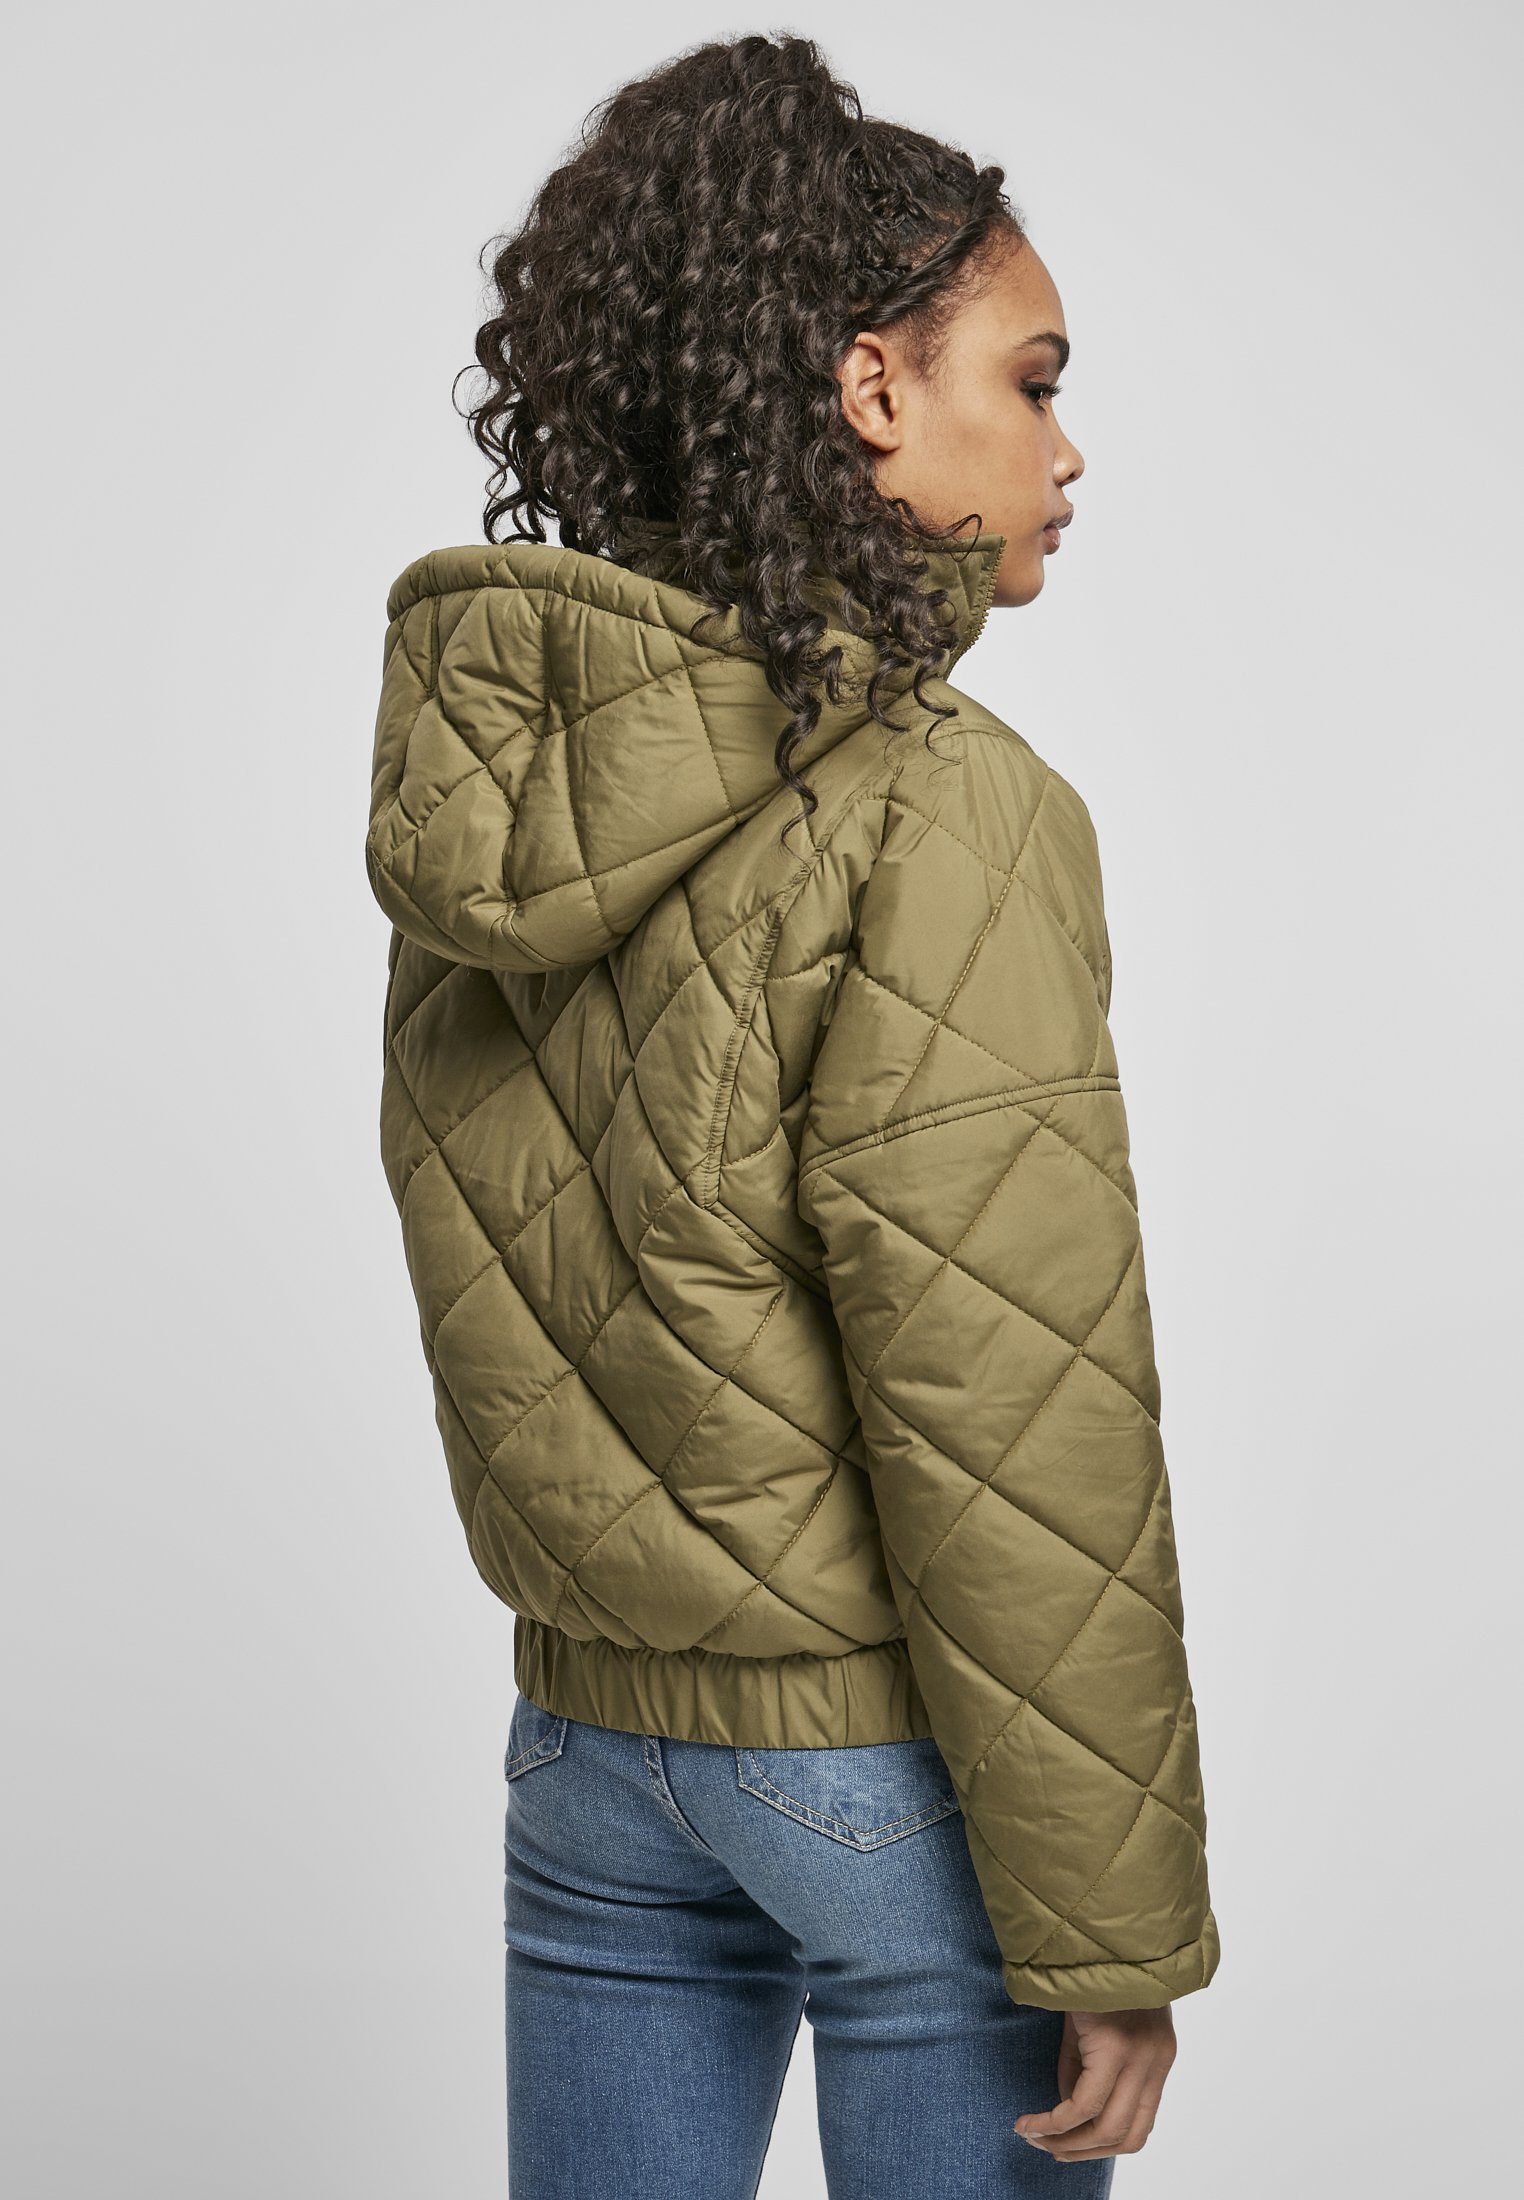 Ladies Oversized Jacket Quilted URBAN tiniolive Diamond Pull CLASSICS (1-St) Damen Over Winterjacke